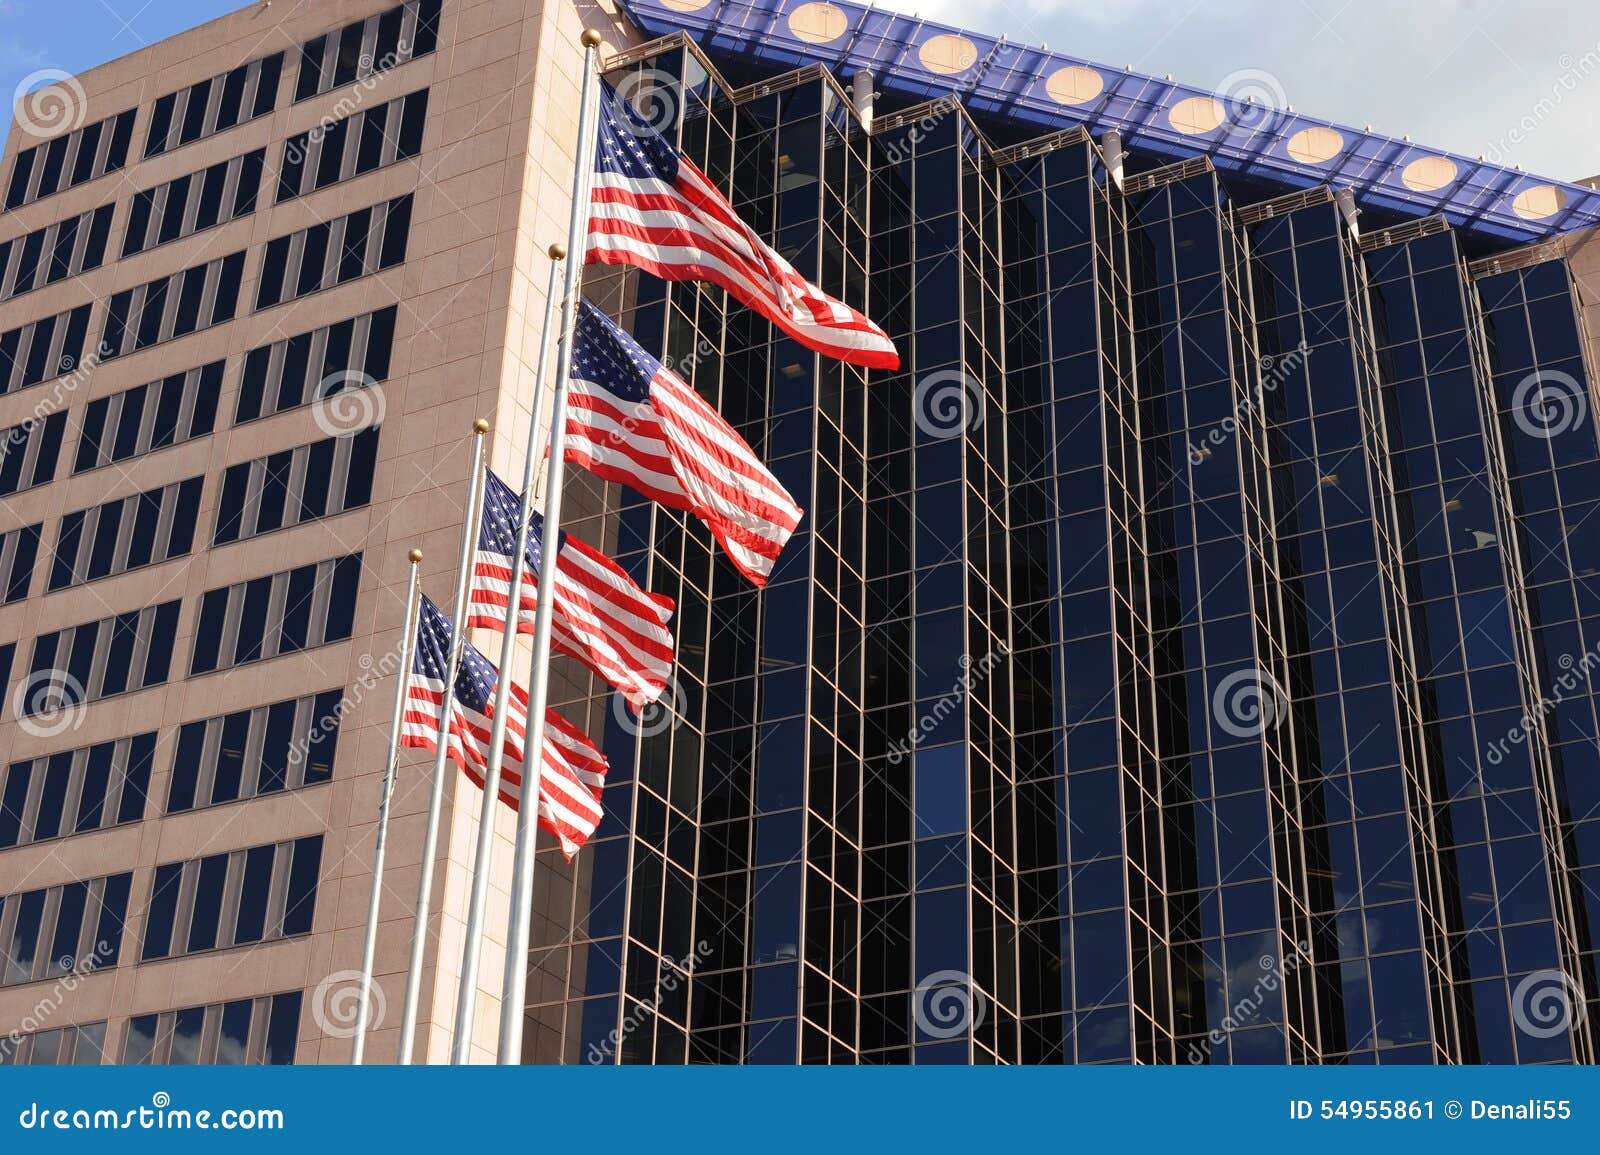 Buildings And American Flags . Stock Image Image of patriotism, architecture 54955861